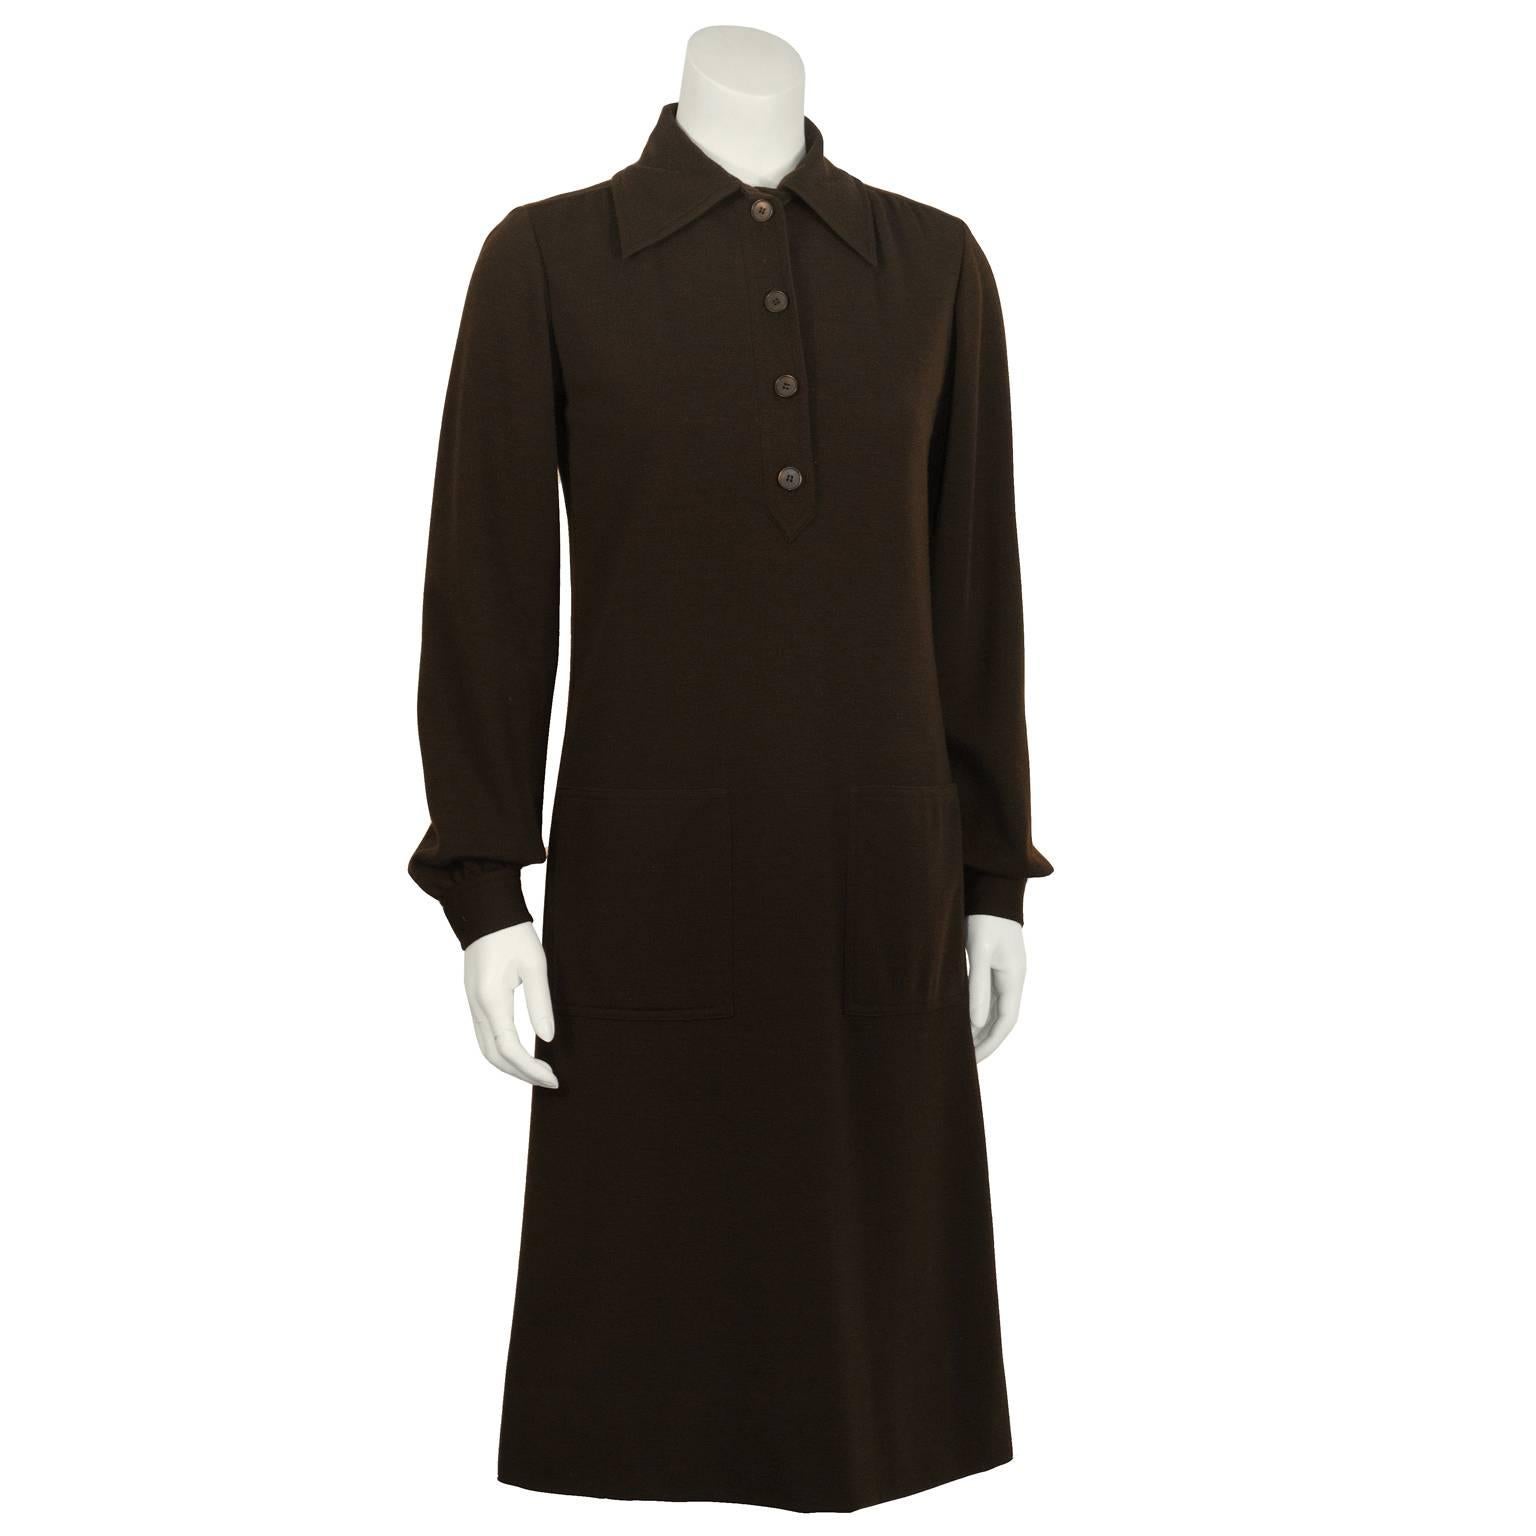 Adorable 1970's Yves Saint Laurent day dress.  Dark brown wool, featuring a wide collar, front button up, two patch pockets, and long sleeves with slight gathering at the cuffs. An amazing piece for transitional weather! Excellent vintage condition.